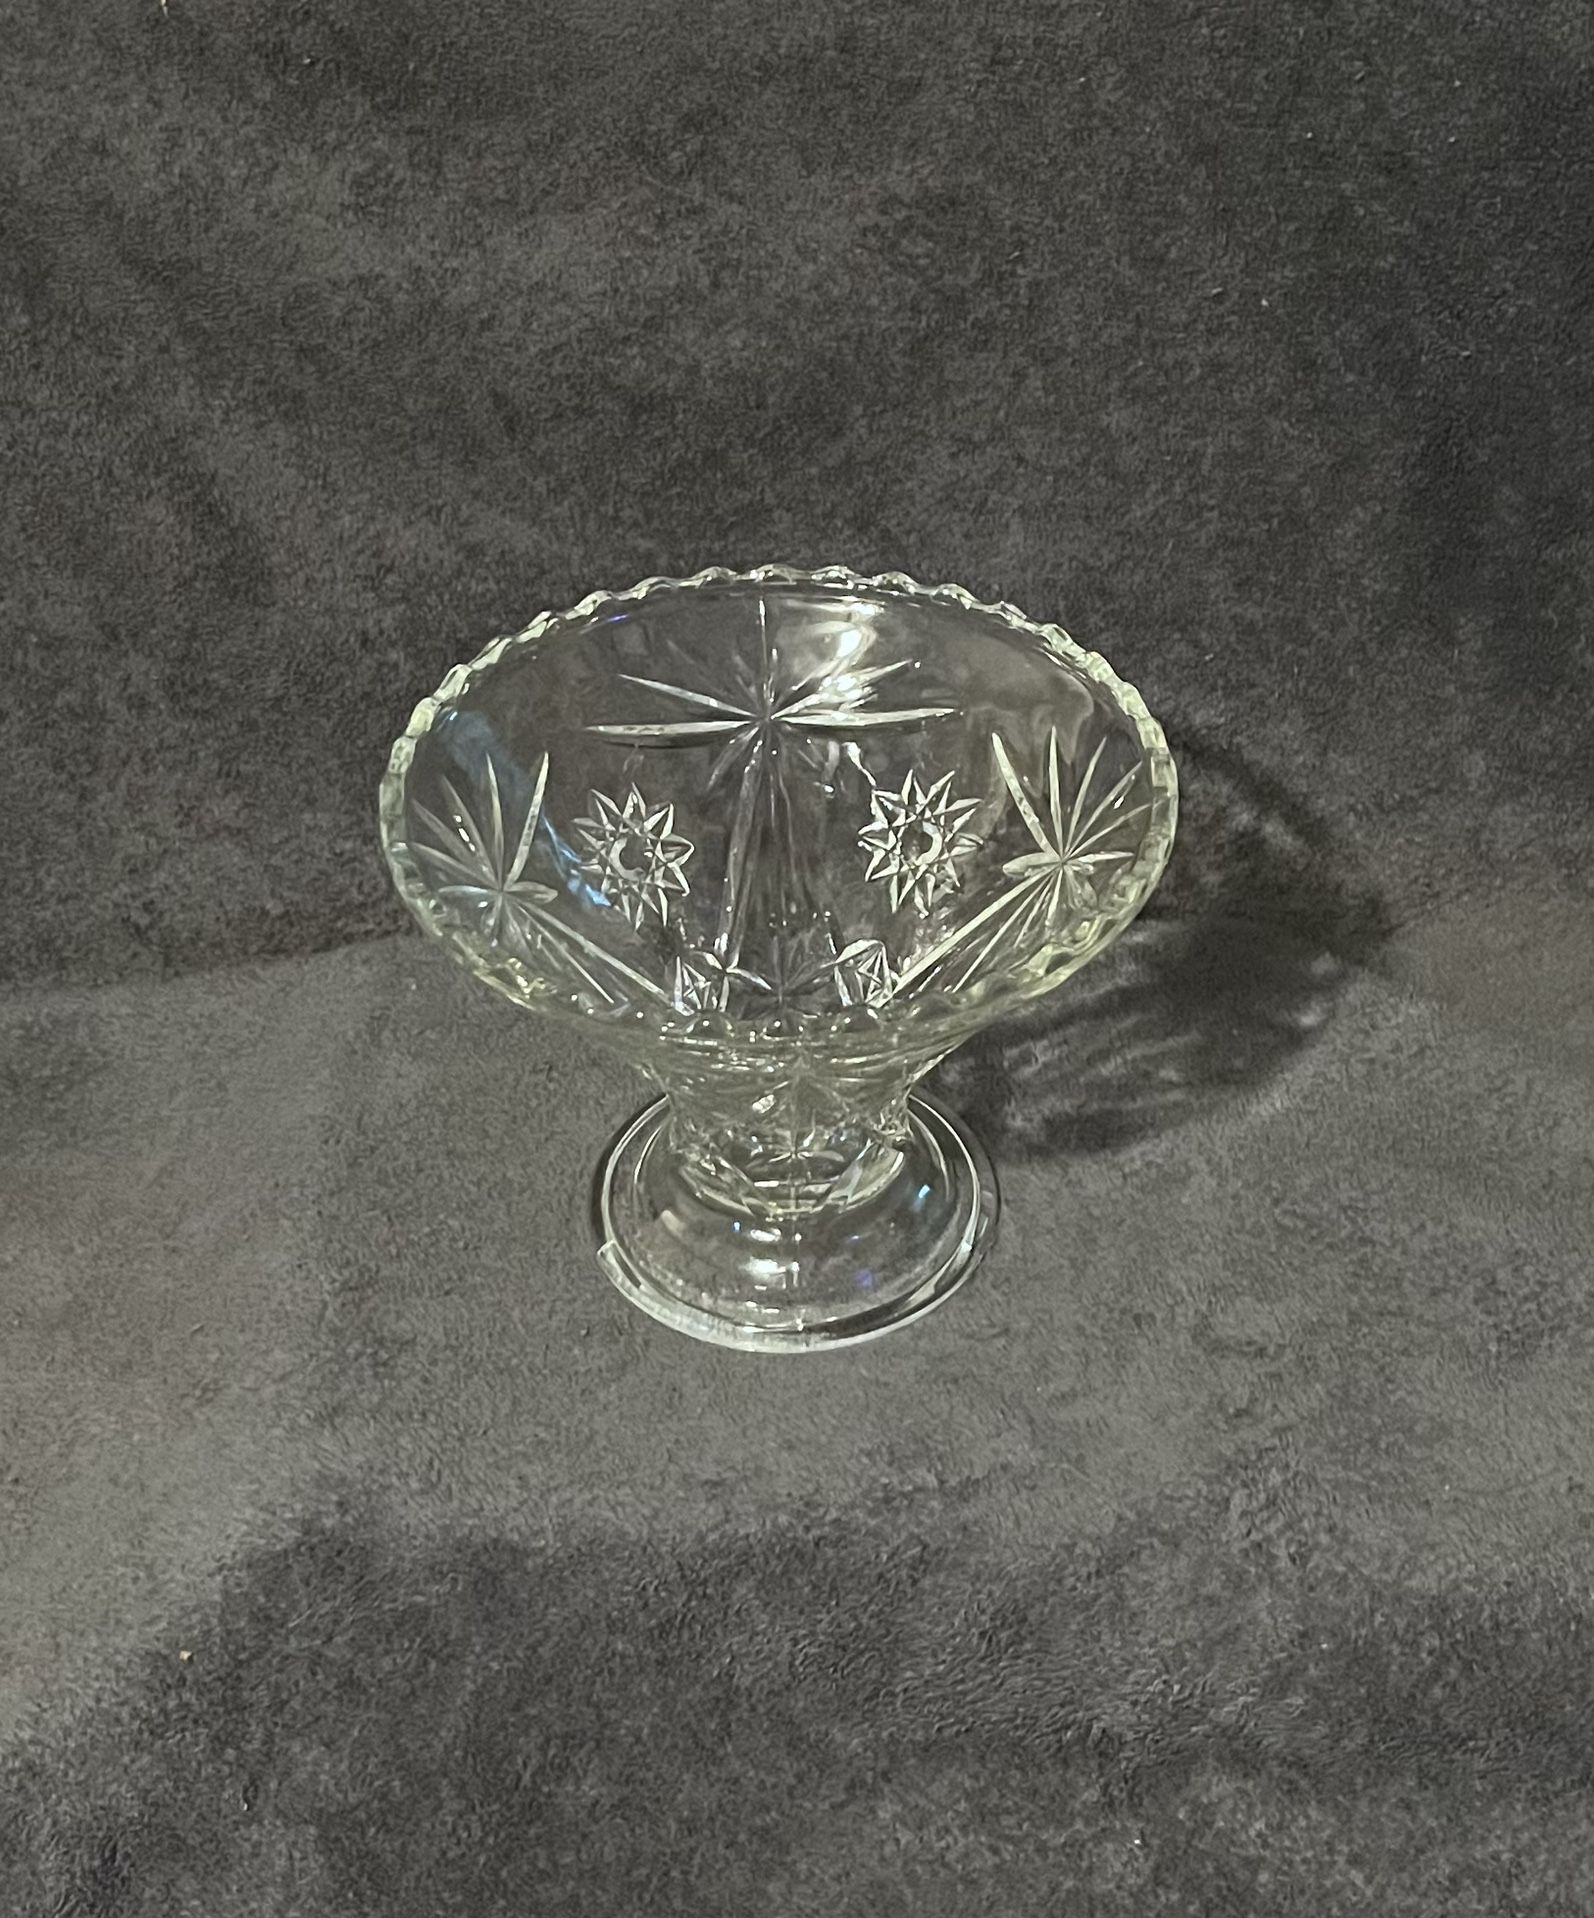 Vintage Anchor Hocking Early American Prescut Punch Bowl Stand/Vase/Compote. 